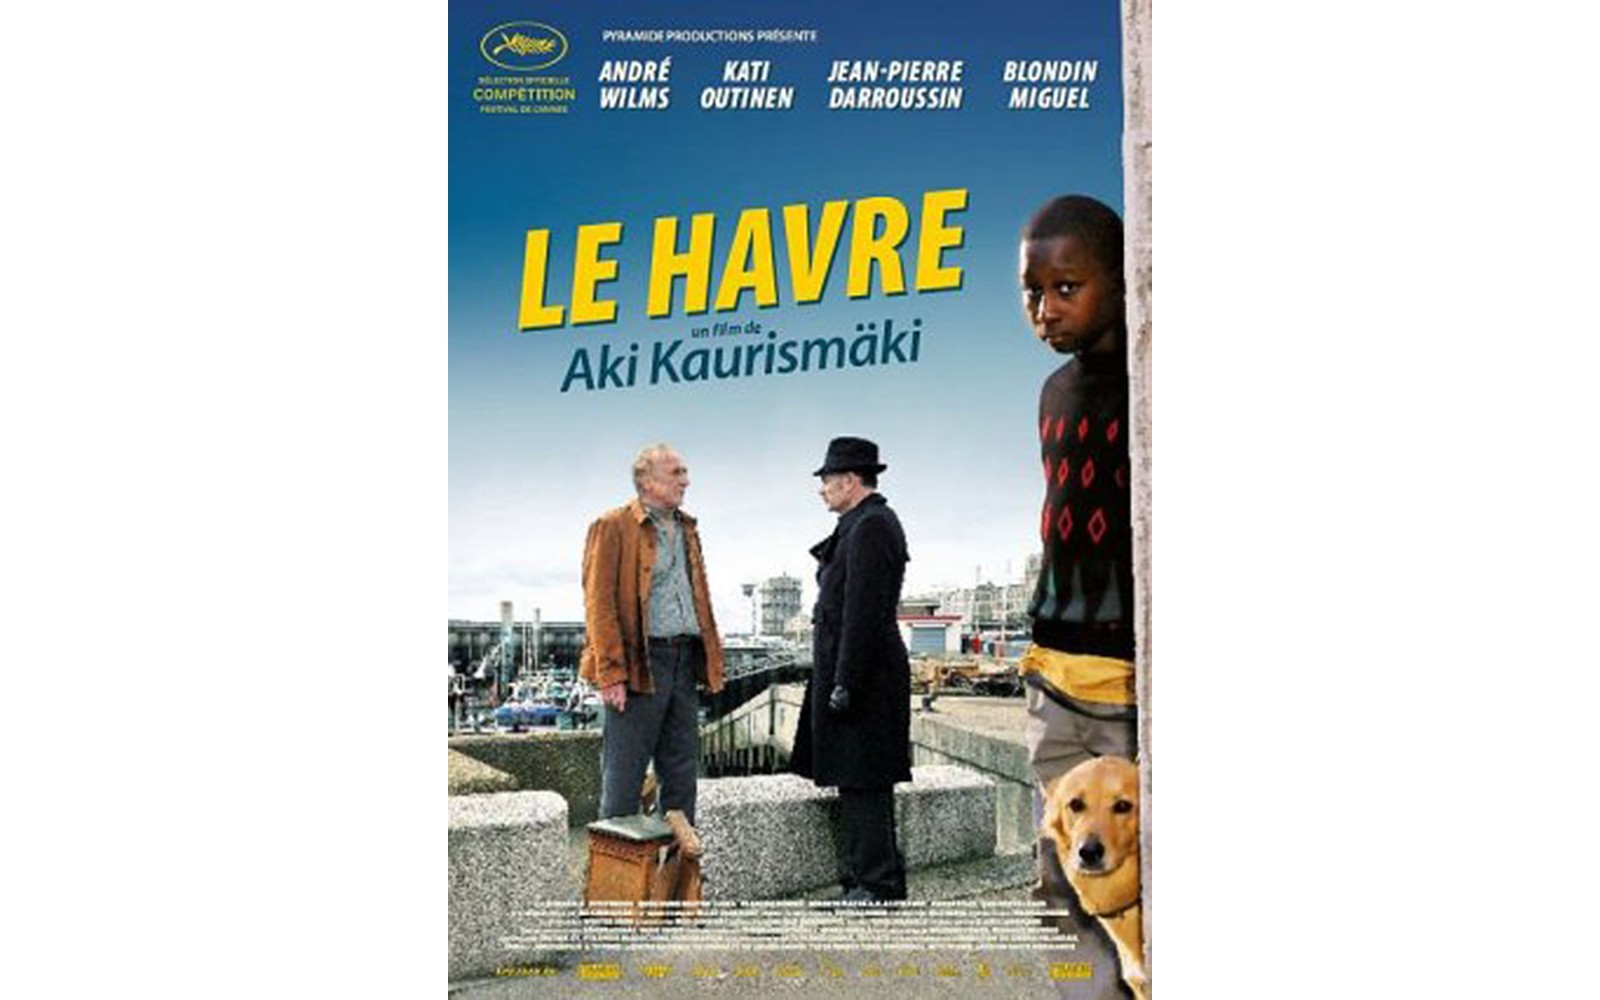 La Havre - WRITTEN AND DIRECTED BY AKI KAURSIMÄKI - CRITERION/ MATCH FACTORY